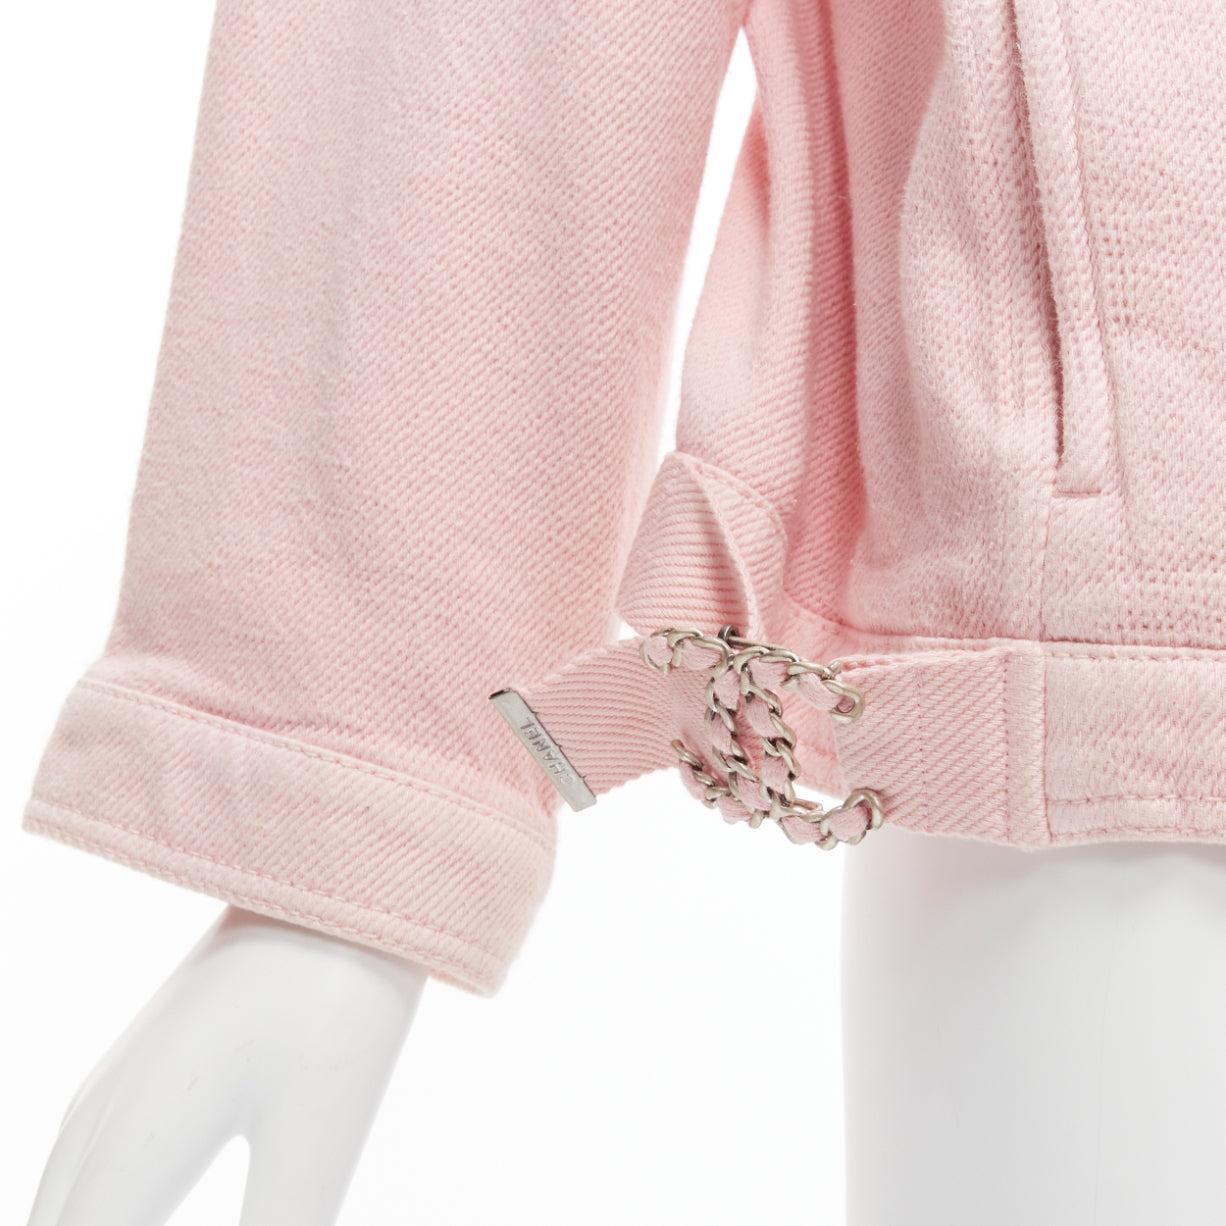 CHANEL 2019 pink cotton 4 pockets CC buttons collarless oversized trucker jacket FR34 XS
Reference: LNKO/A02211
Brand: Chanel
Designer: Virginie Viard
Collection: SS 2019
Material: Cotton
Color: Pink
Pattern: Solid
Closure: Button
Lining: Pink